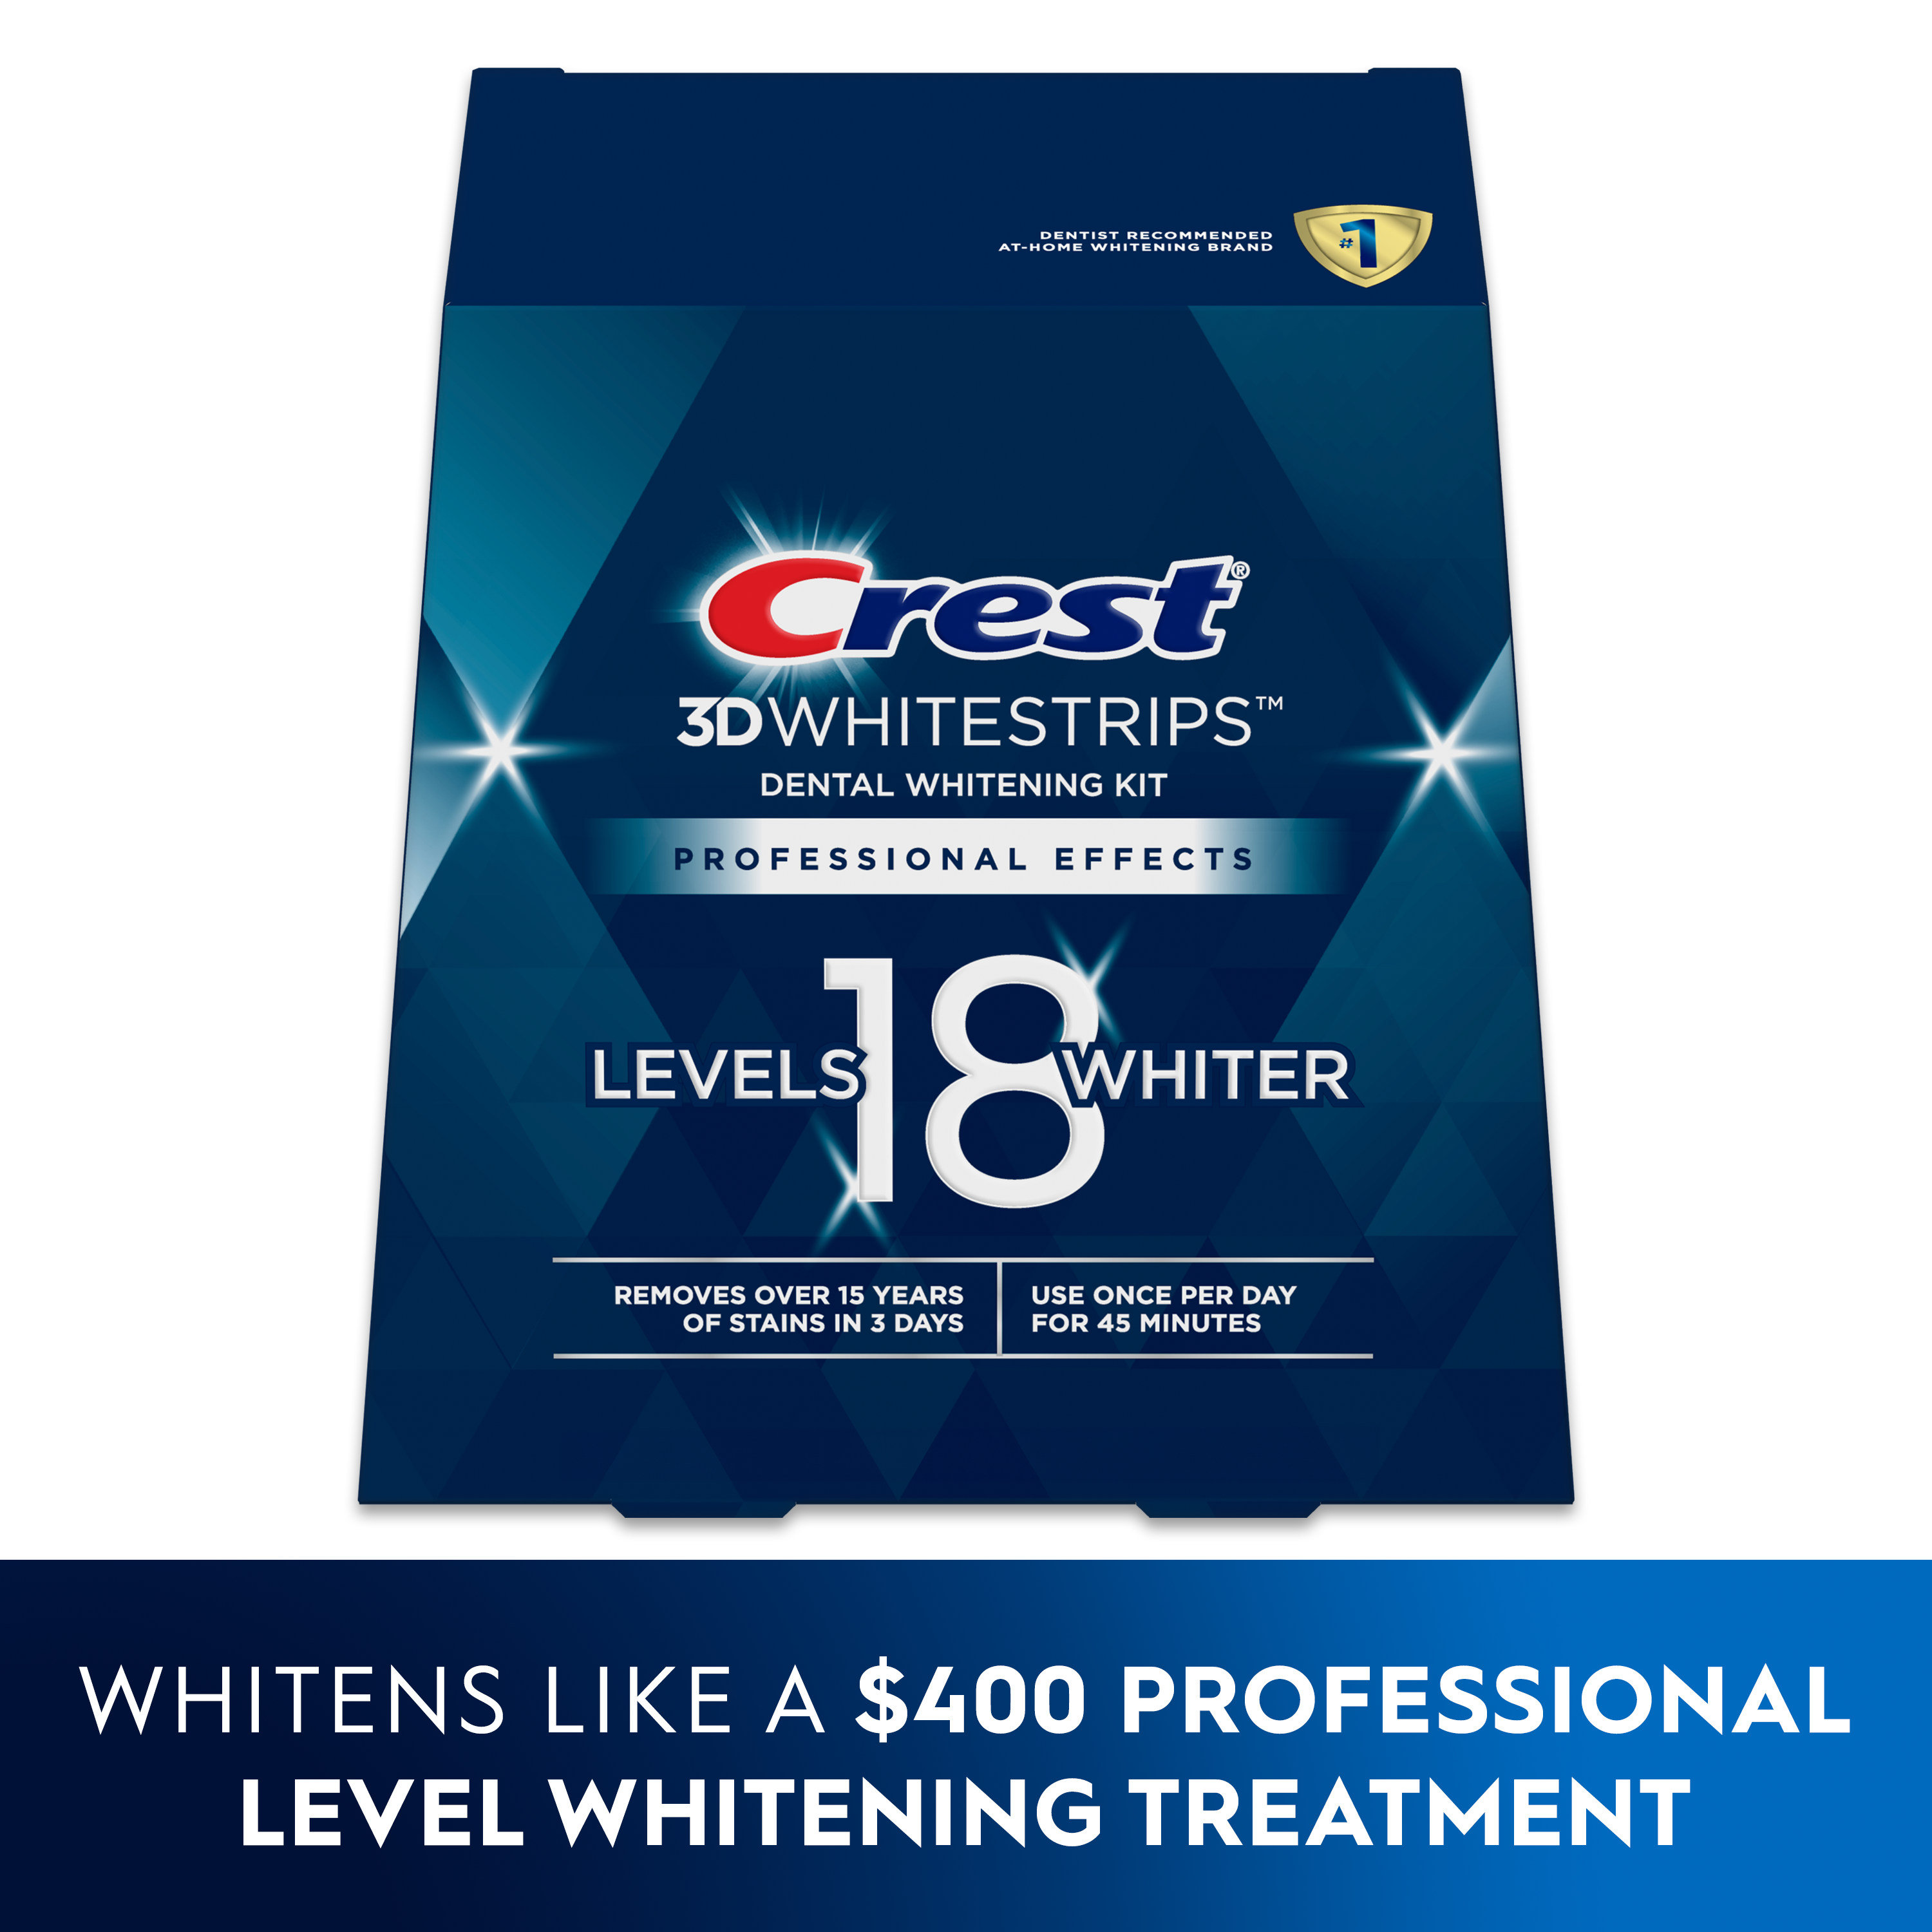 Crest 3D Whitestrips Professional Effects Teeth Whitening Strips Kit, 20 Treatments - image 1 of 6